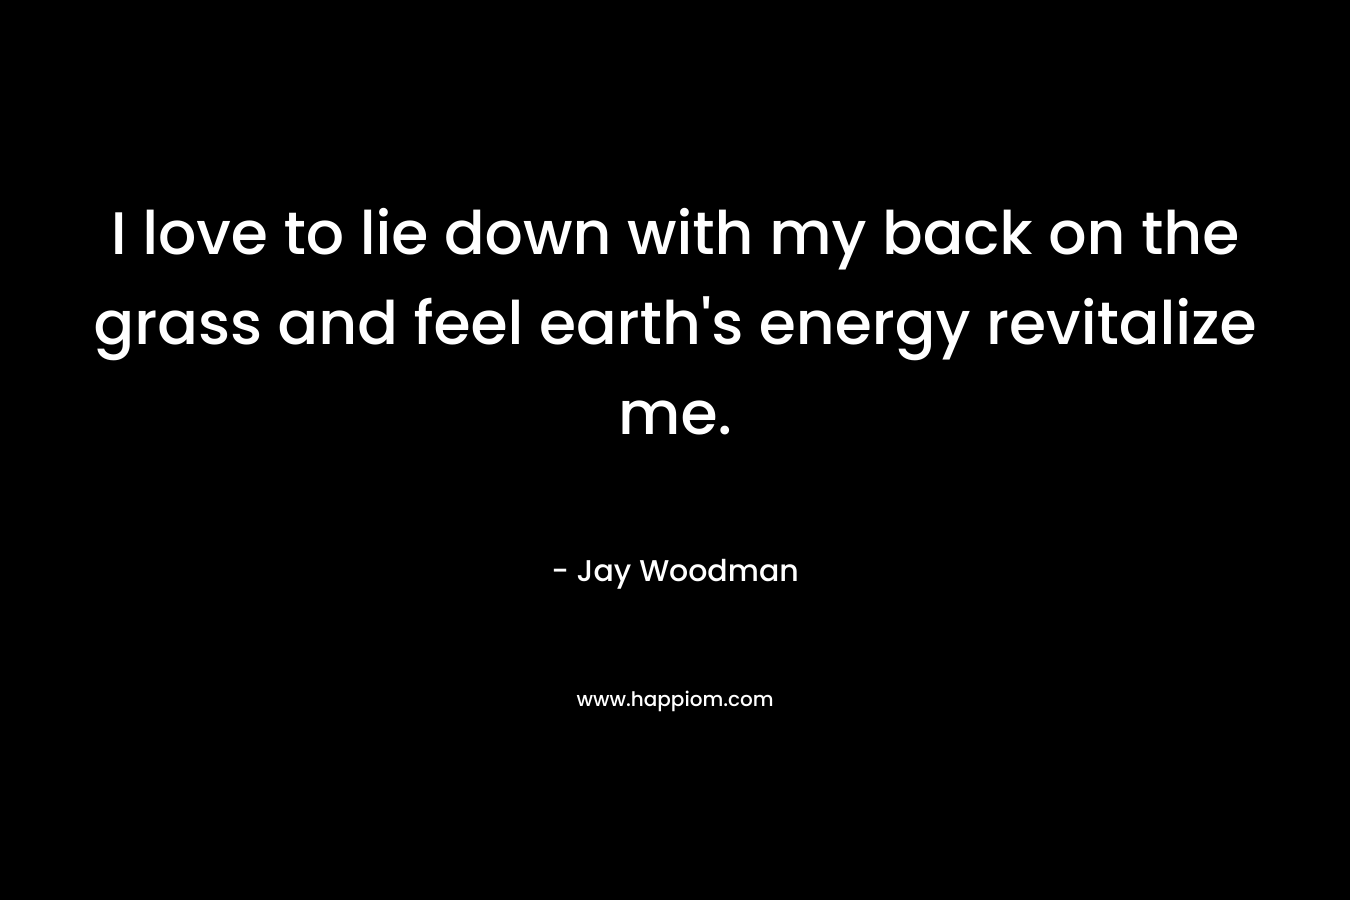 I love to lie down with my back on the grass and feel earth’s energy revitalize me. – Jay Woodman